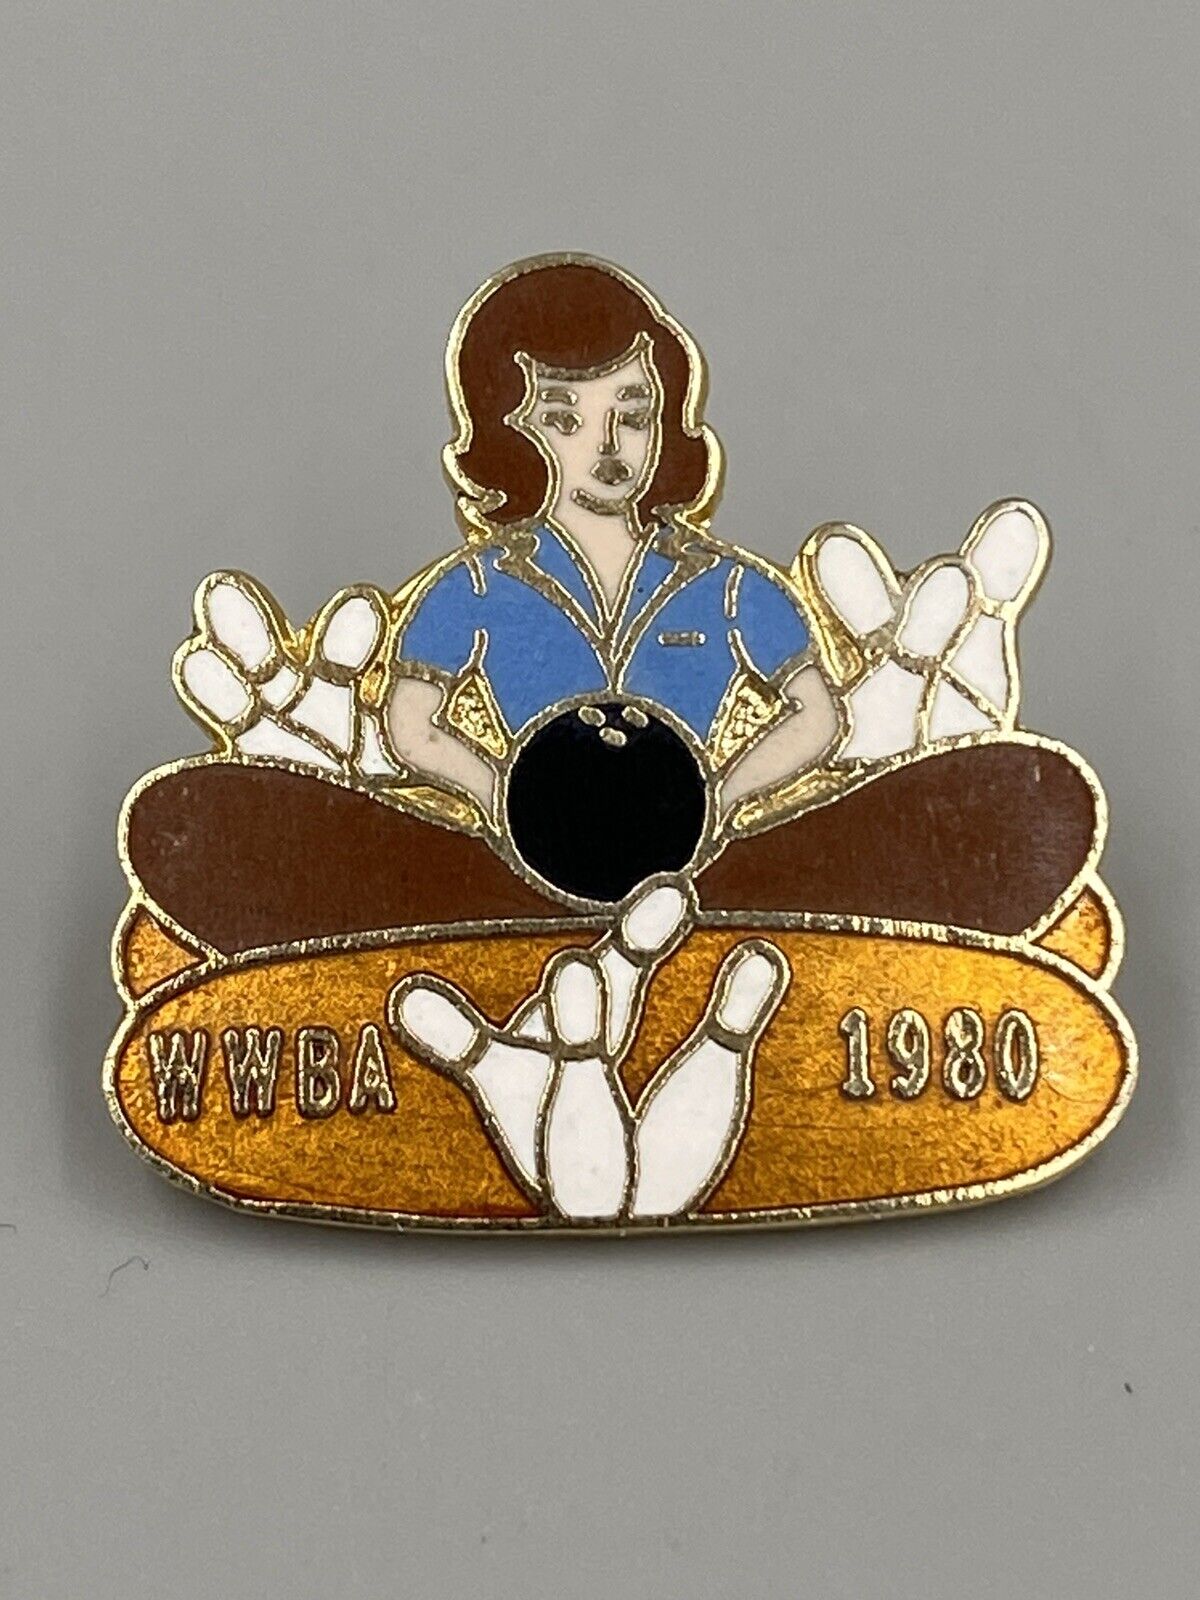 Vintage WWBA 1980 PIn of Woman Surrounded by Bowling Pins Lapel Pin